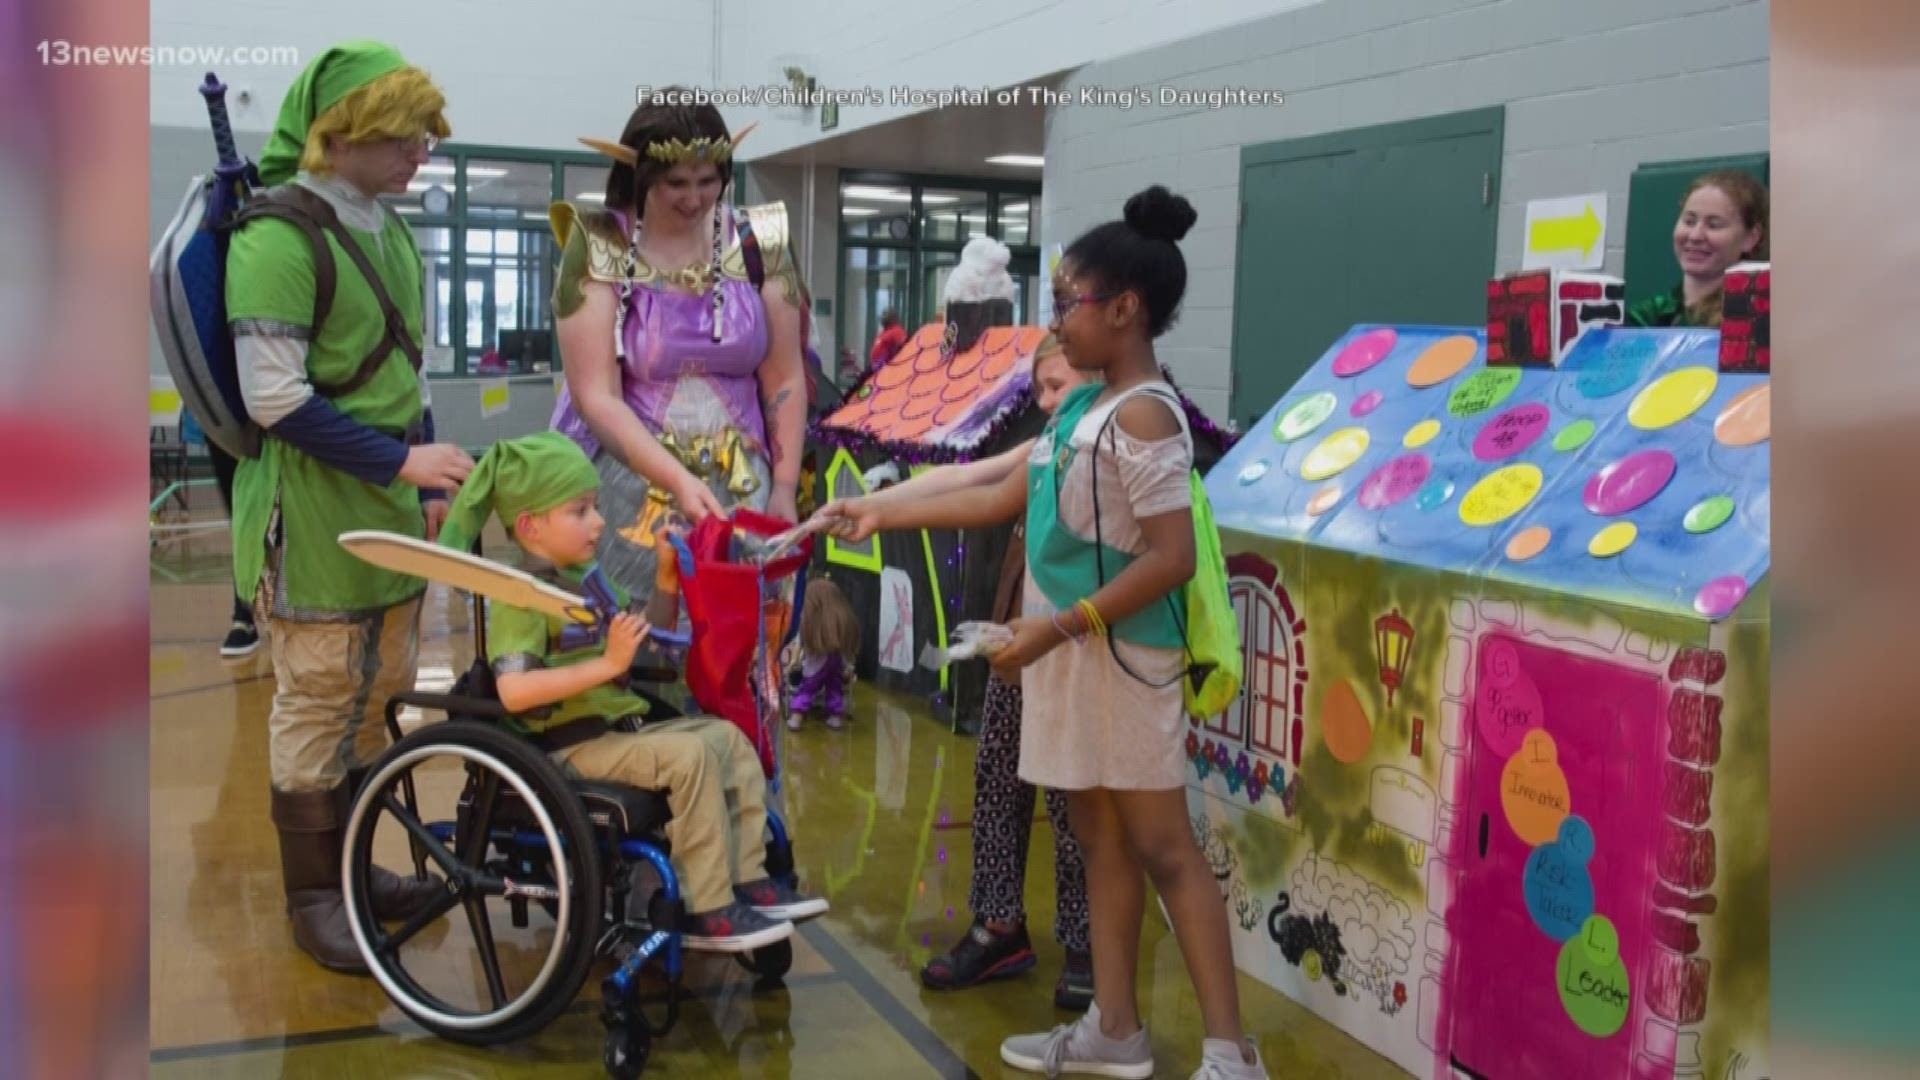 CHKD is hosting a Halloween-themed Fall Fest for children with mobility issues and special needs. Dan Kennedy sits down with Dr. Charles Dillard to discuss the event